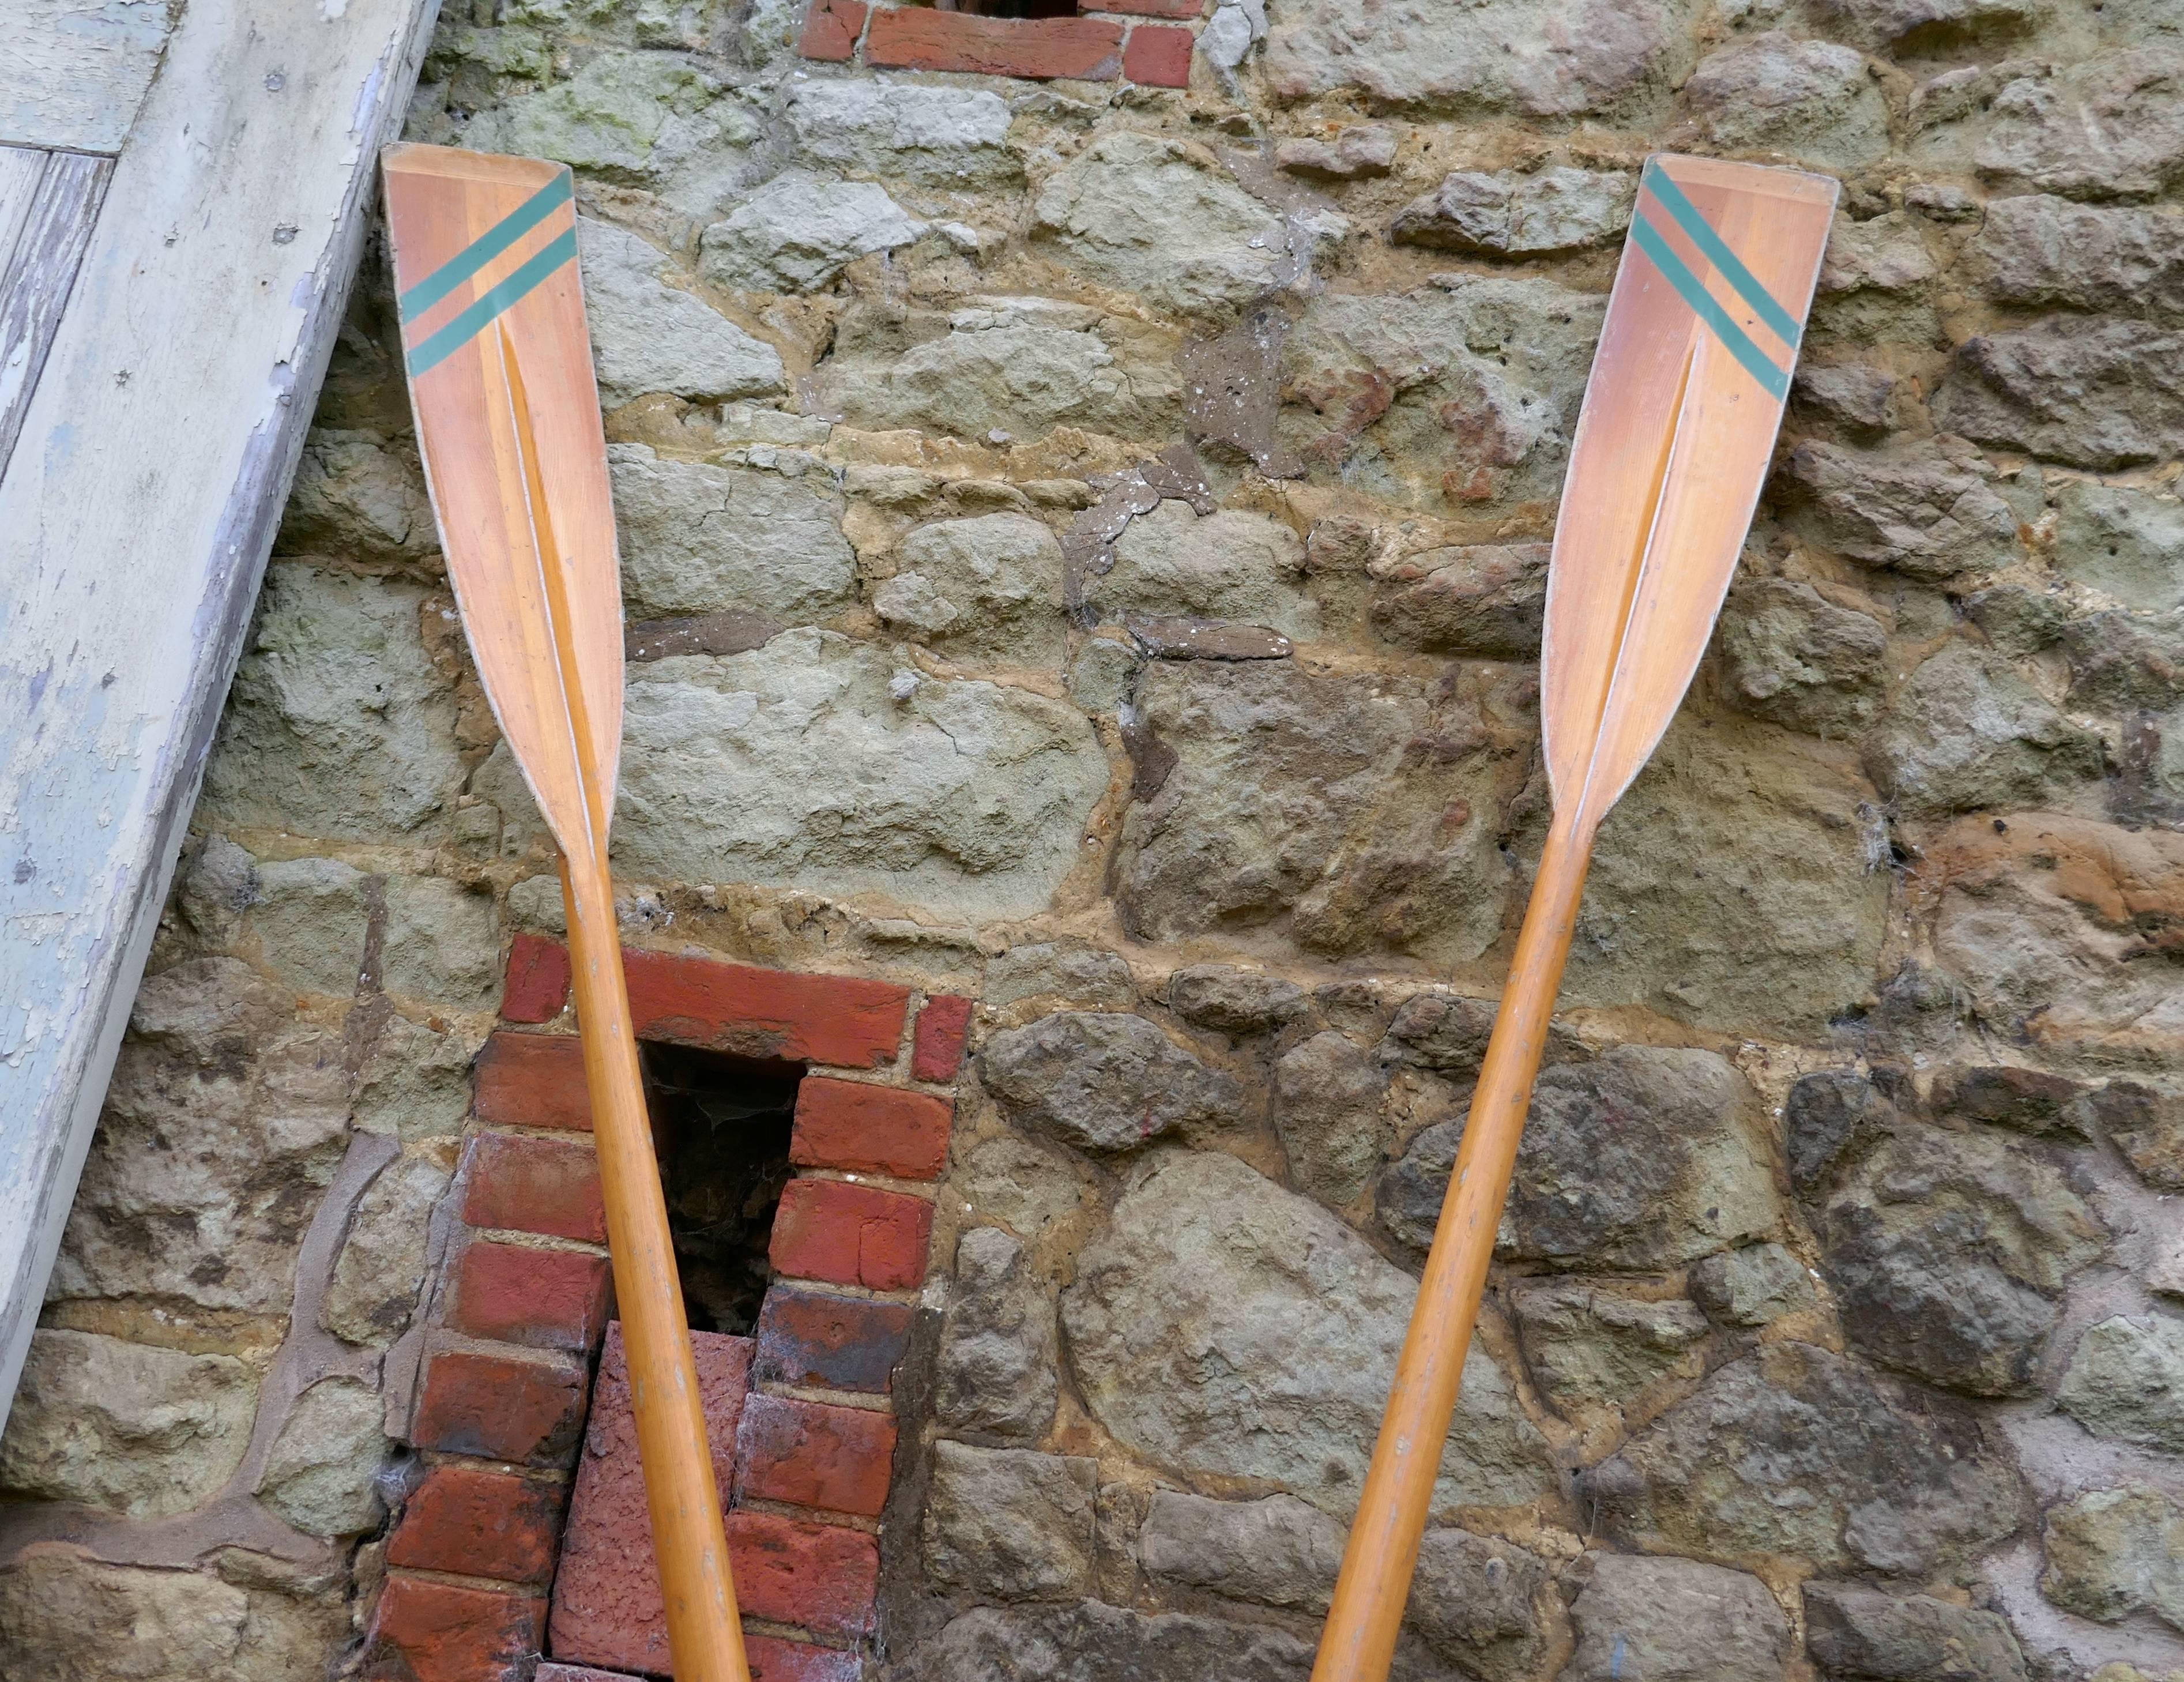 A pair of decorative very long sculling oars

This is a fine quality pair of long oars from a Thames Rowing Club, the spoons or blades have diagonal green parallel lines painted on them and the long ash shafts are in their original varnished